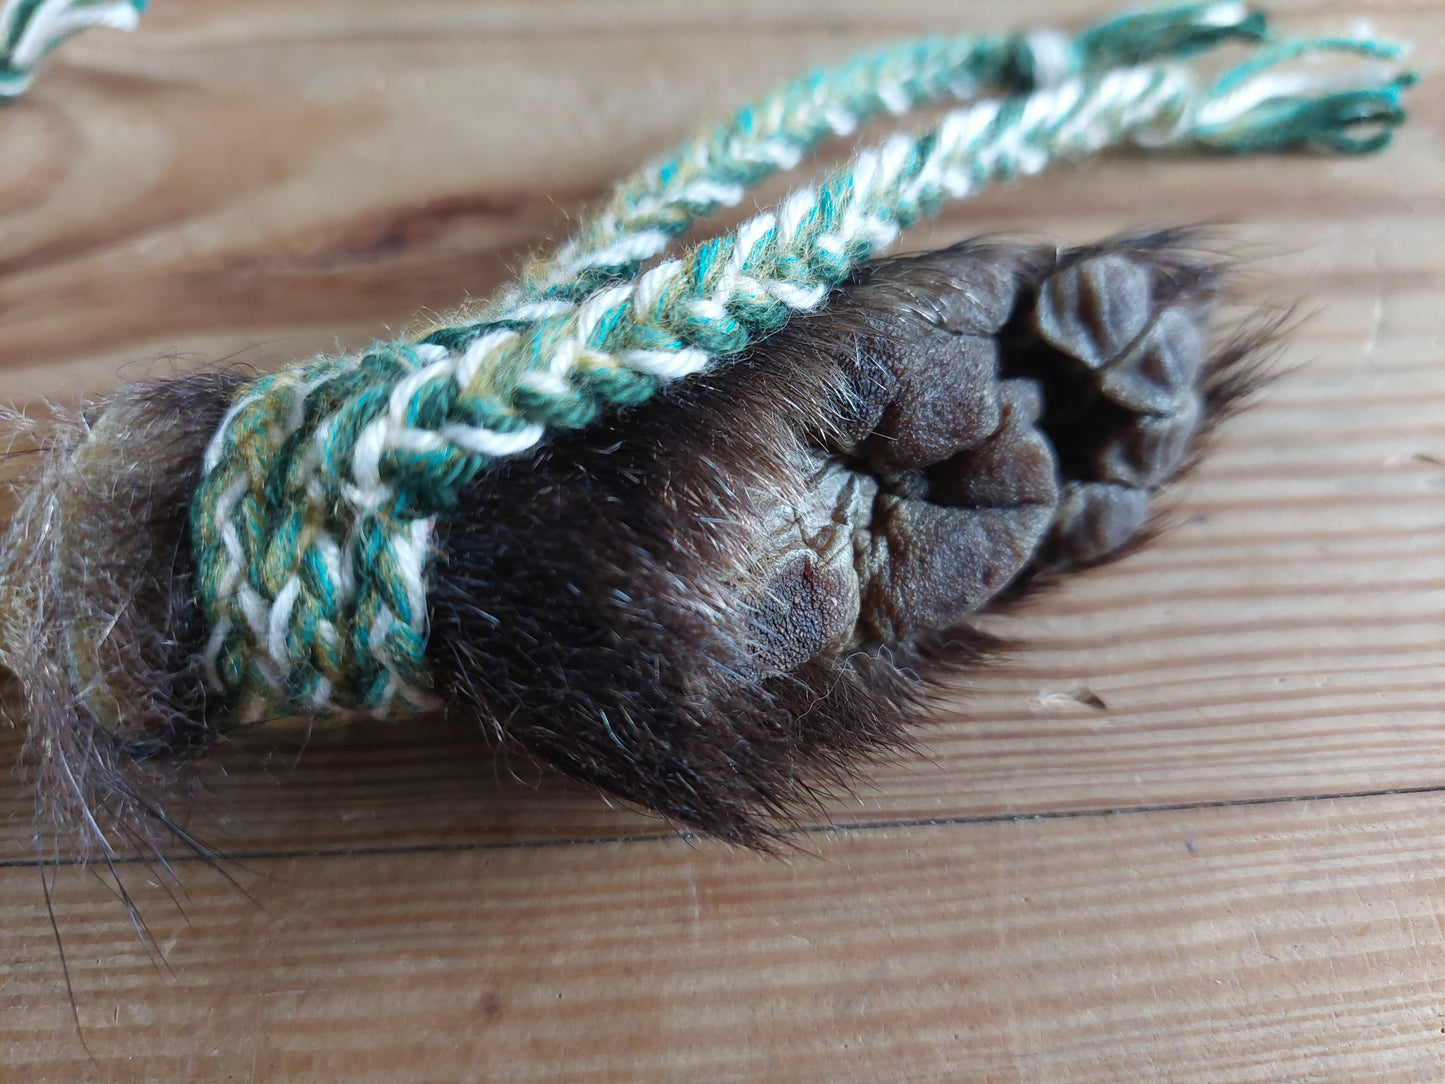 Horse hide, badger paw and pine wood rattle